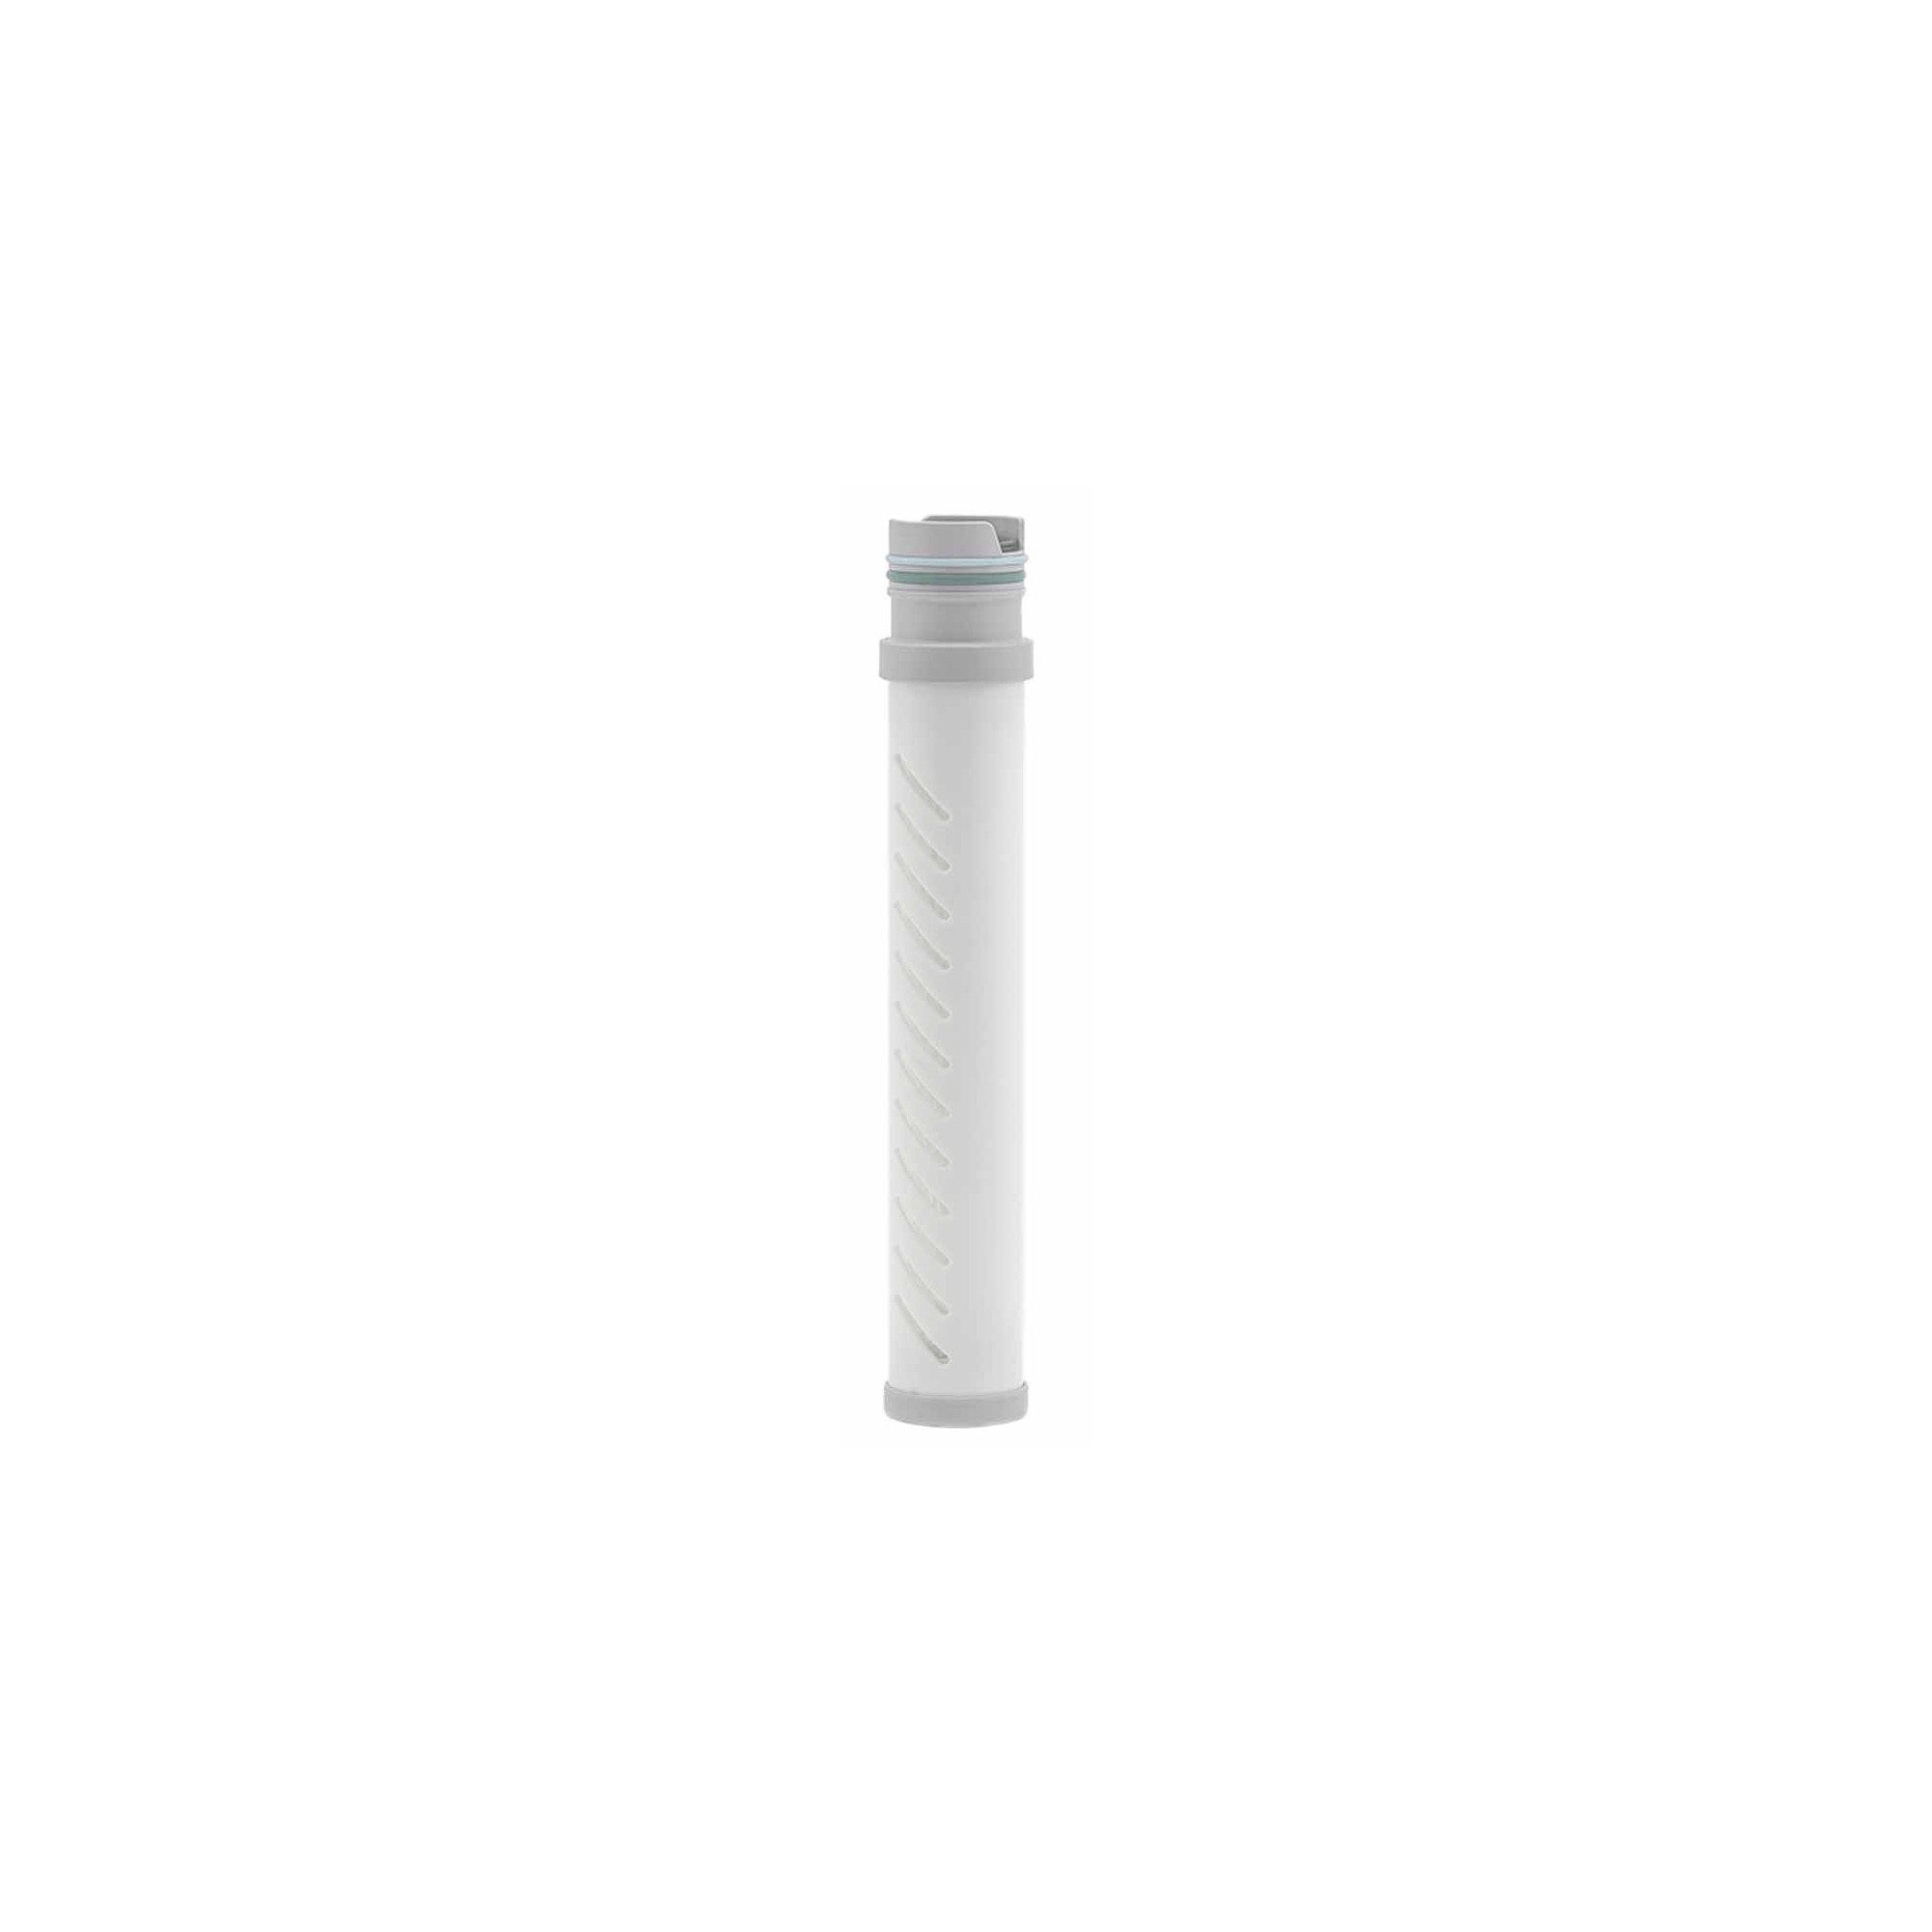 LifeStraw Replacement Filter for GO and GO2